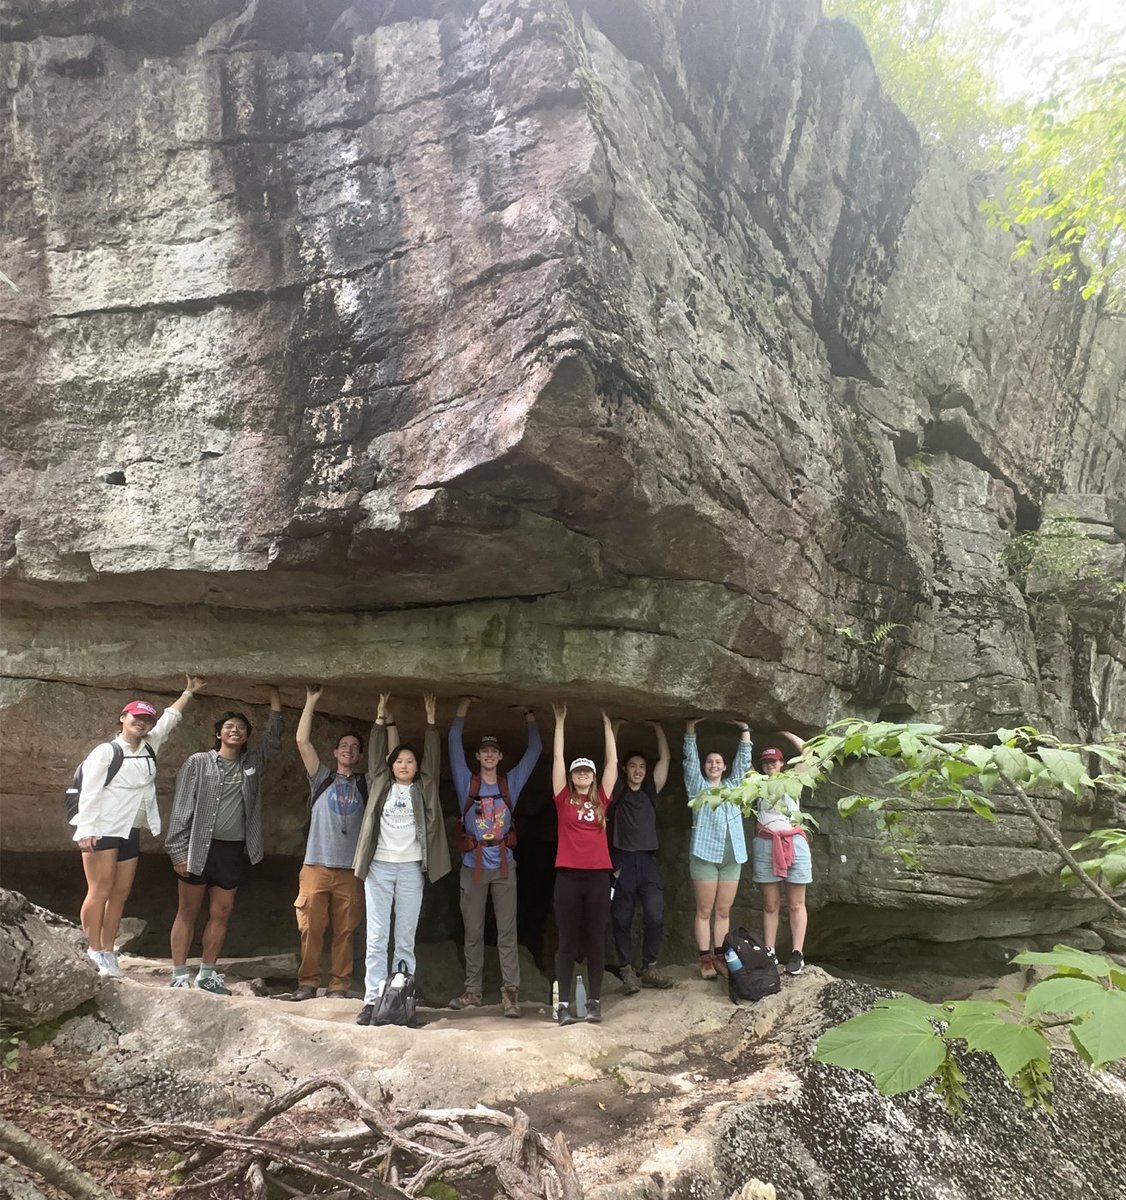 Understanding the Earth is the foundation of good stewardship of this planet. @colgateuniv students were out in the Shawangunk mountains this weekend exploring Ordovician seas and wandering up Silurian mountain streams.... before stopping for ice cream.